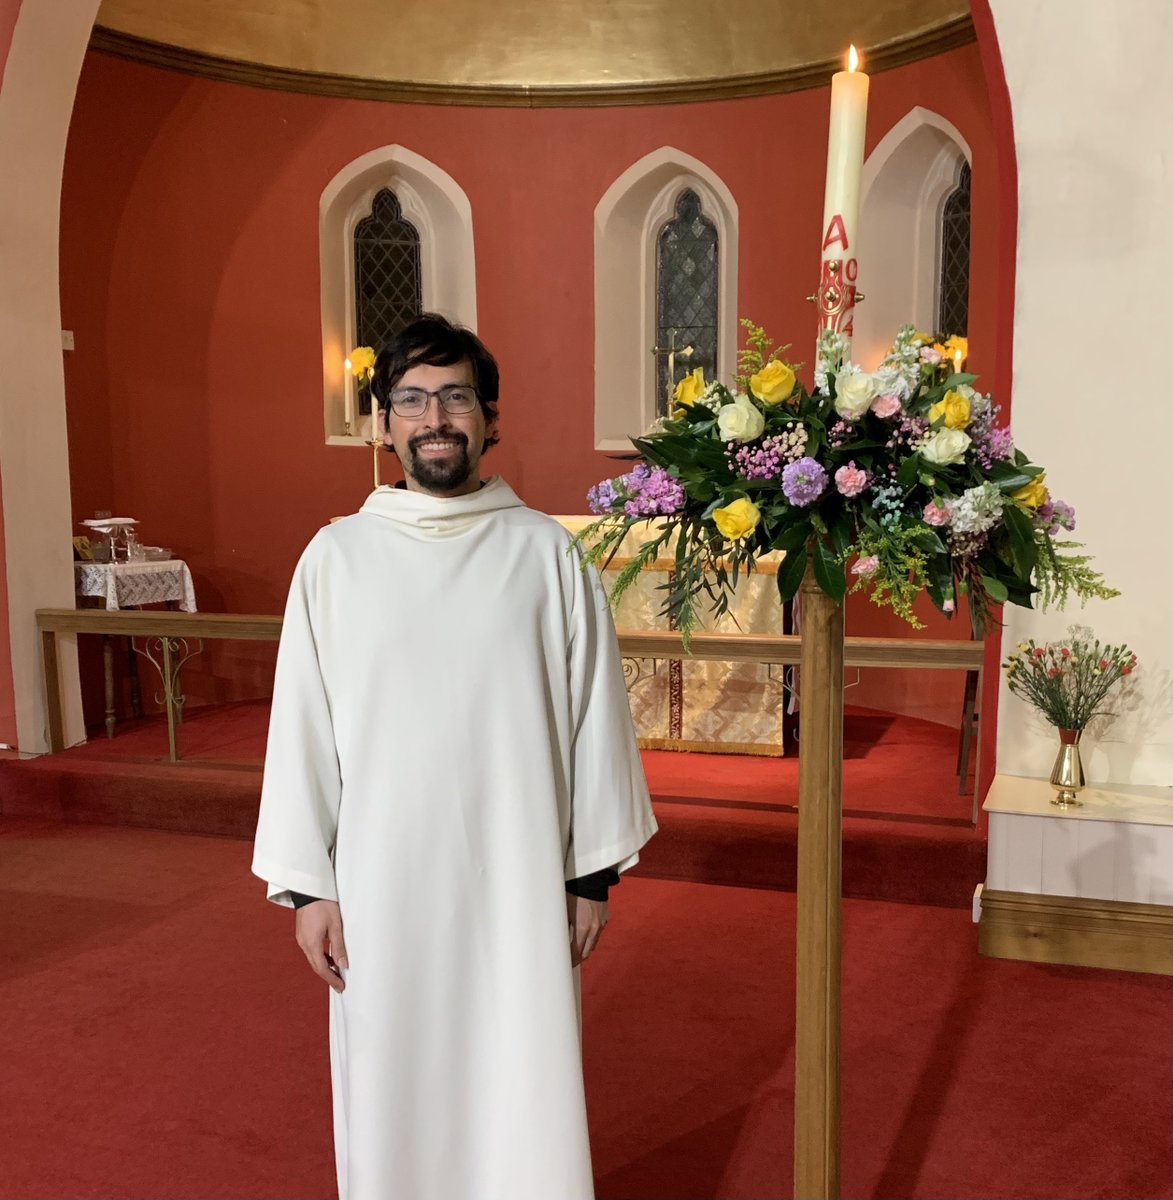 You are invited to #Evensong this Sunday, 5pm at St Peter's. Our preacher will be our @TimeForGodVols volunteer, Juan, who will preach on Romans, as part of our series 'Why St Paul's letters matter today'. Here is a lovely photo of Juan after serving at the Easter Vigil.